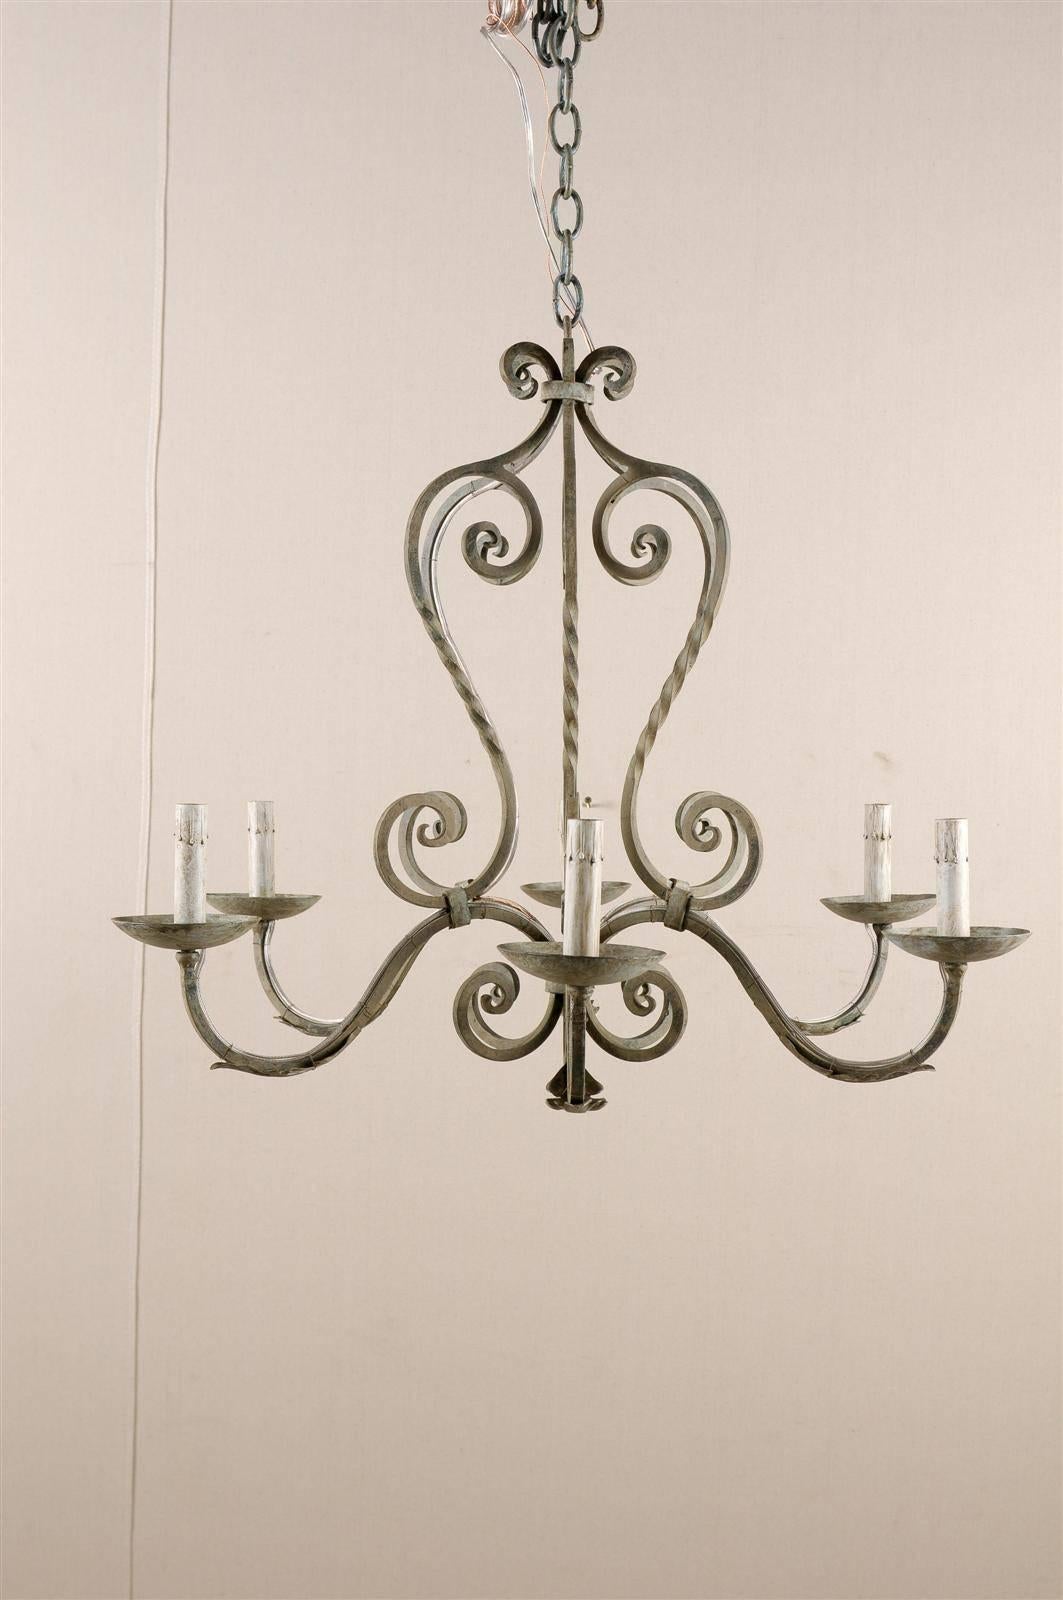 A French painted iron six-light chandelier. This French vintage mid-20th century light fixture is made of a succession of scrolls, giving a very curvy look to the chandelier. The little scrolls at the top are gathered inside a link and flow to six